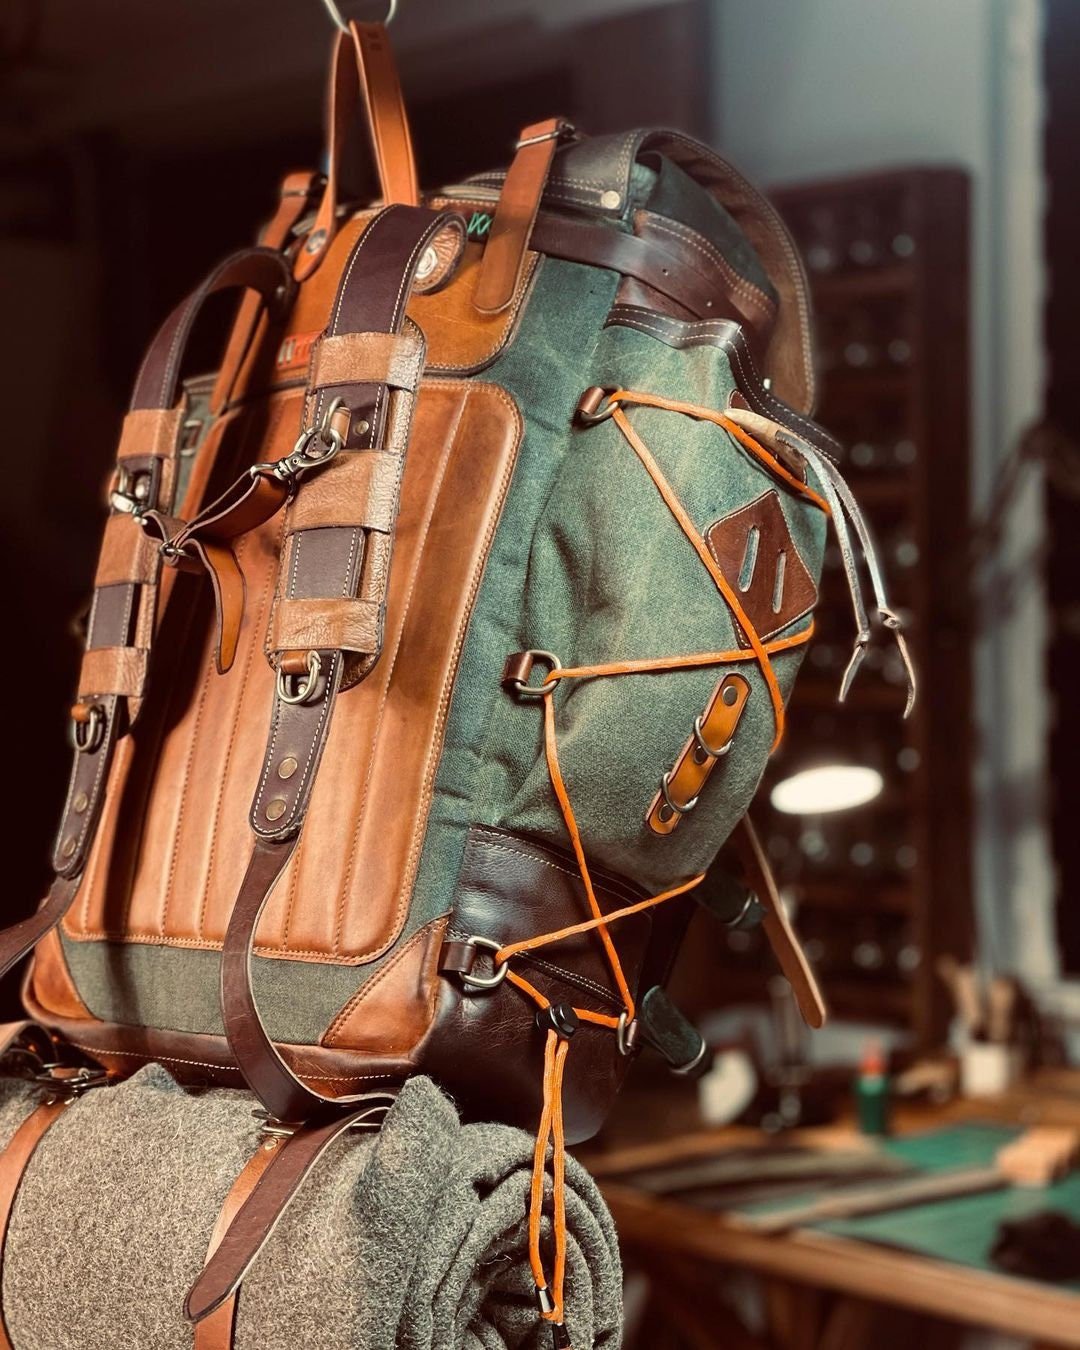 Green Backpack | Bushcraft Design Awards | Handmade Leather and Waxed Backpack for Travel, Camping,Military | 45 Liter | Personalization bushcraft - camping - hiking backpack 99percenthandmade   